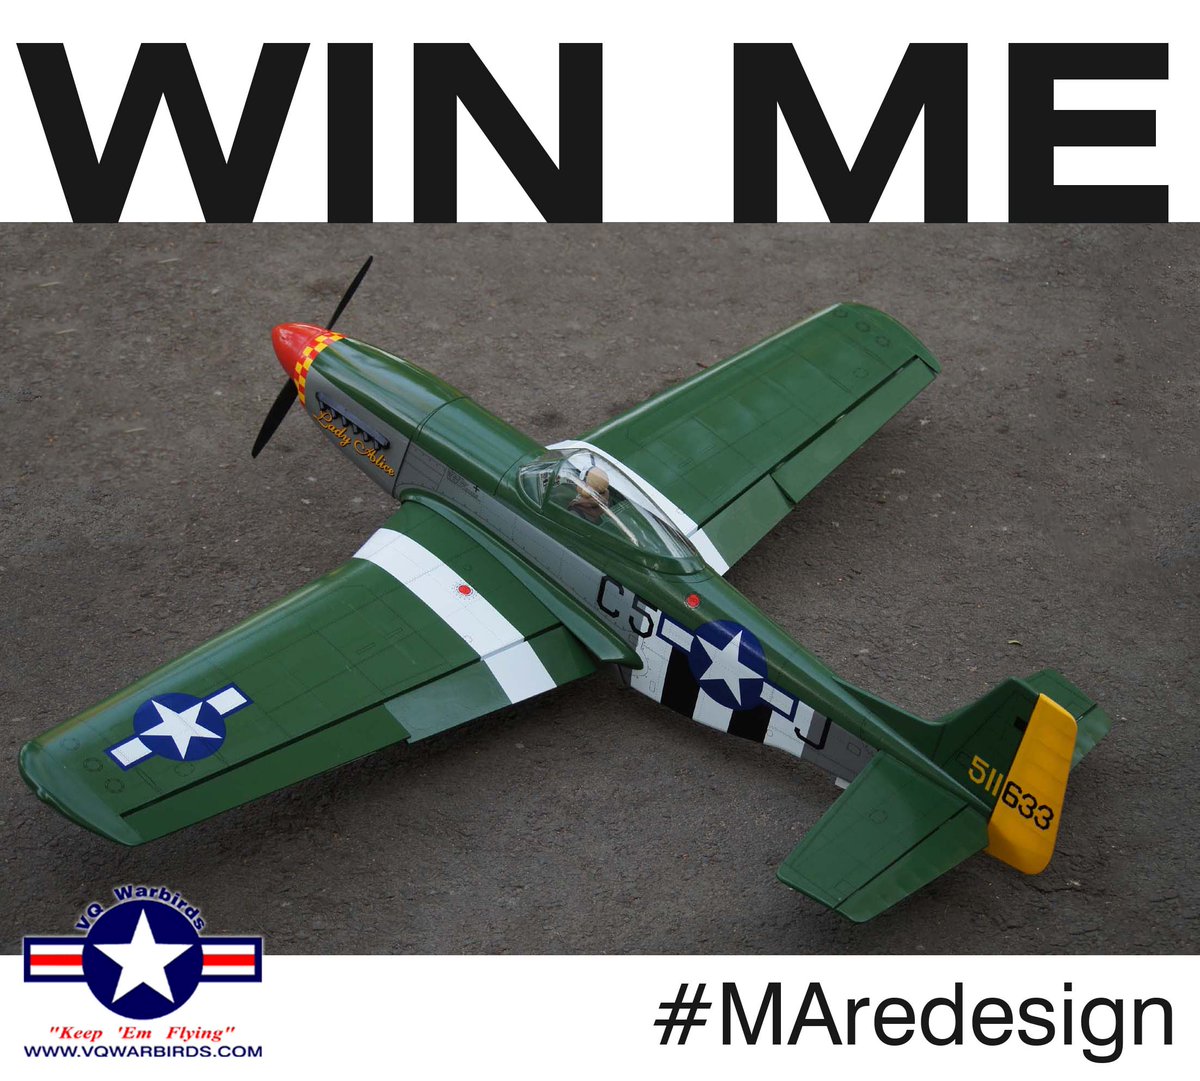 While attending #AMAExpo West, Don't forget to participate in our Model Aviation #MAredesign giveaway and be entered to win a VQ Warbirds P-51D Lady Alice! Learn more at amaexpowest.com/model-aviation….